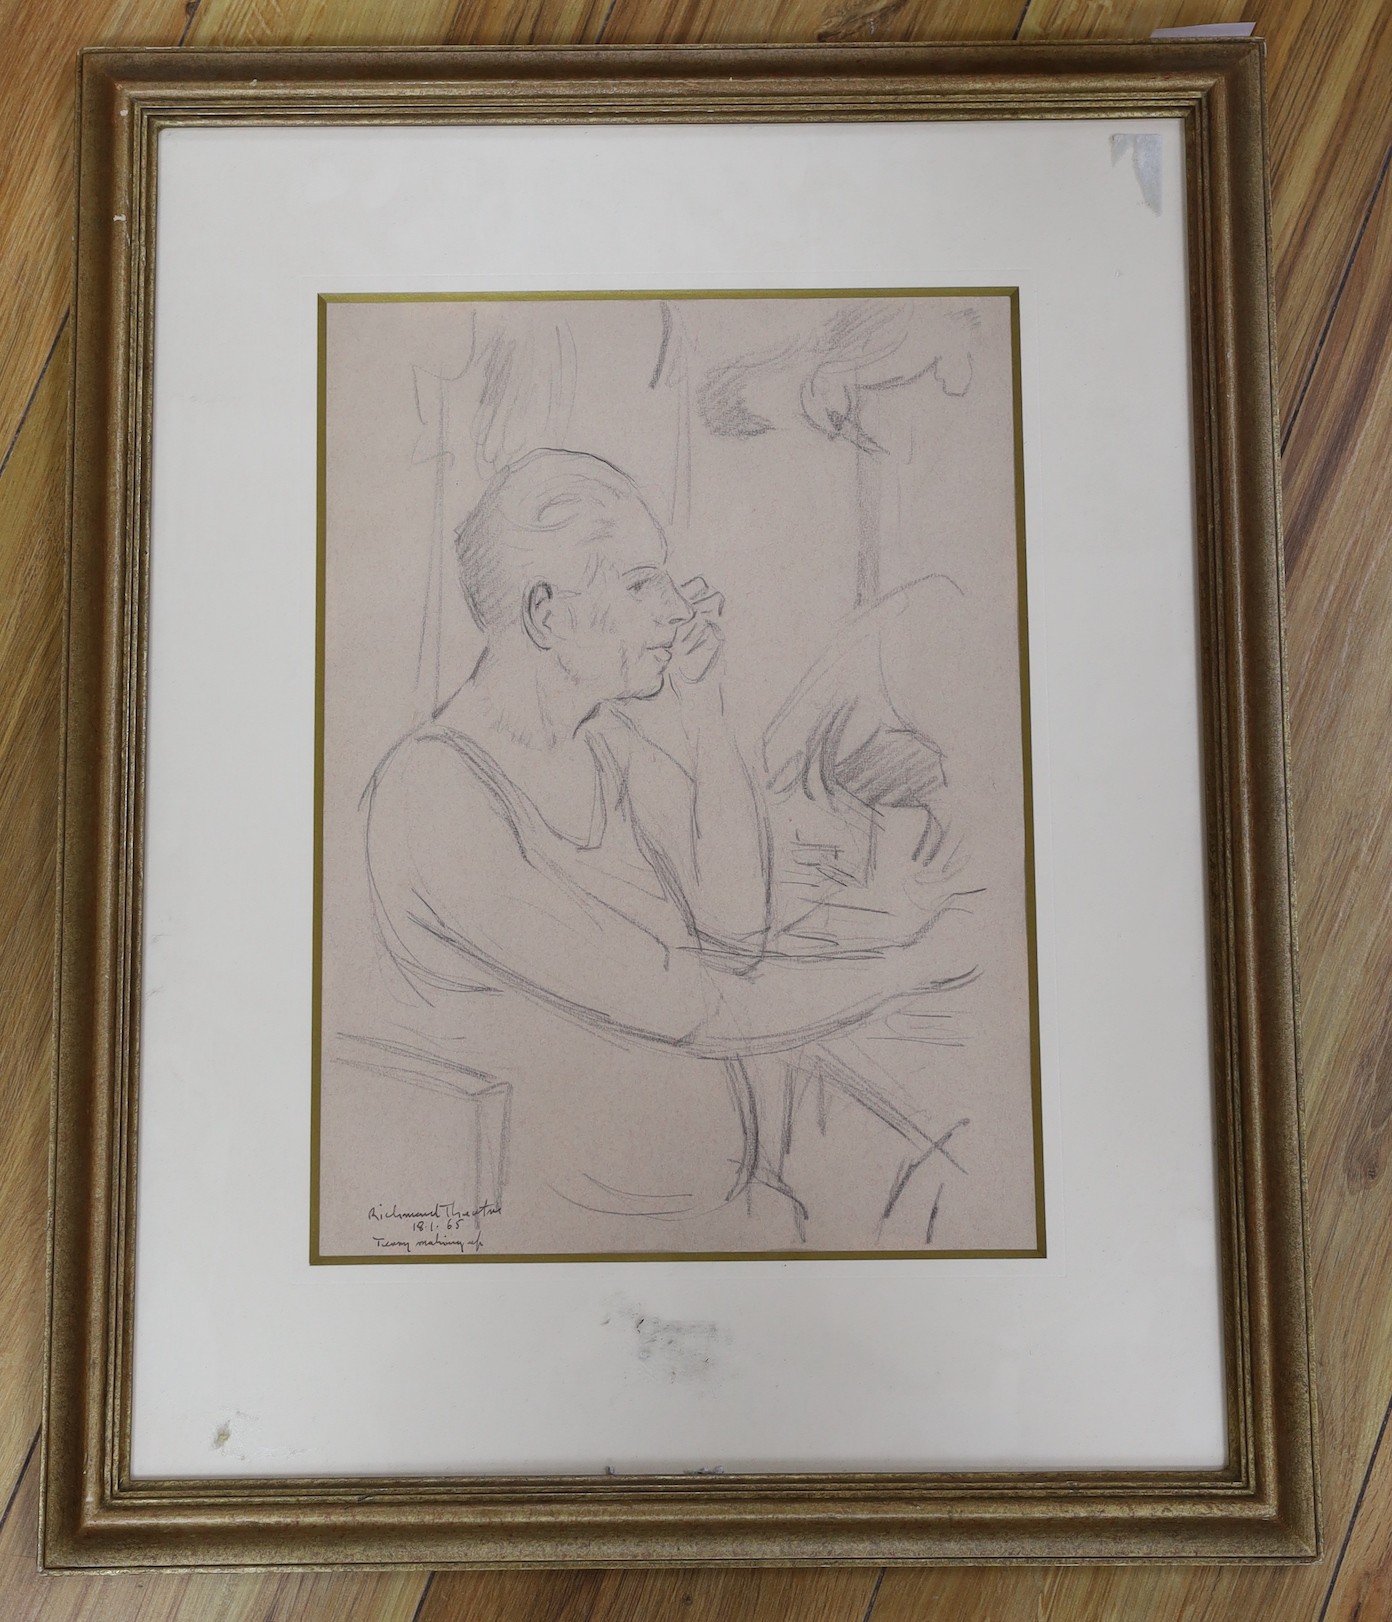 Clifford Hall (1904-1973), pencil drawing, 'Richmond Theatre 18.1.65, Terry Making Up', signed and dated, 37 x 27cm